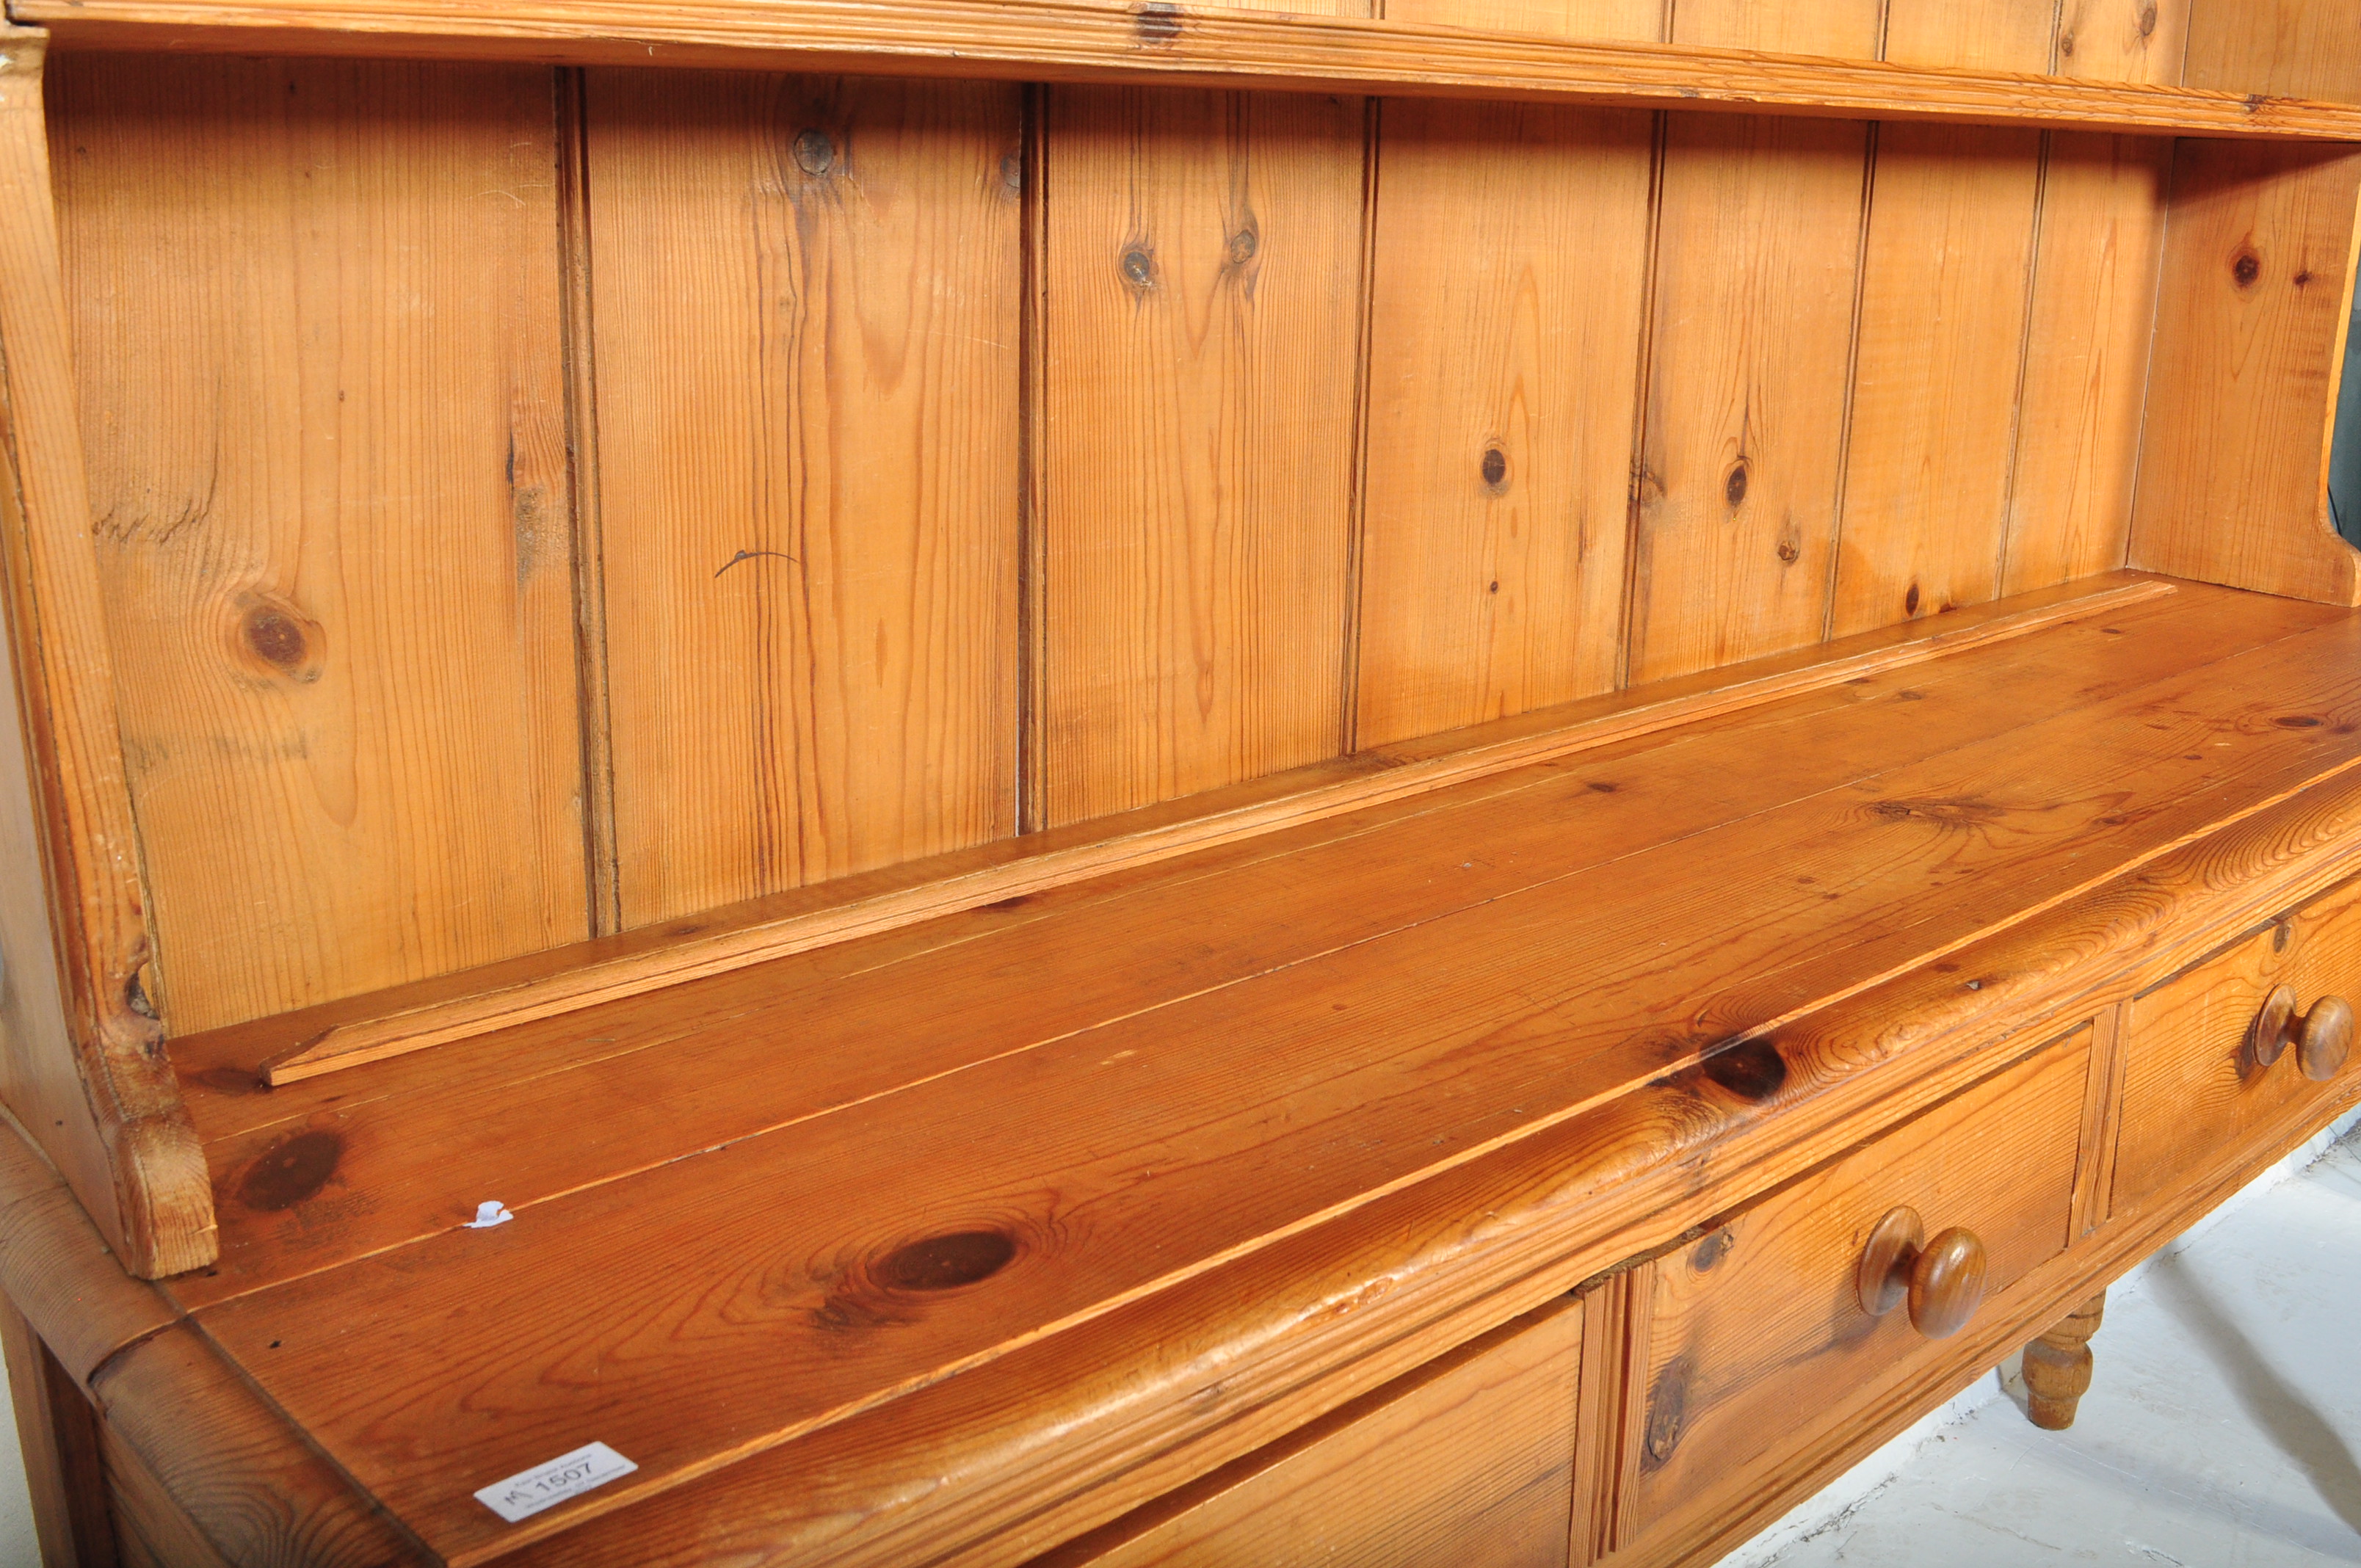 VICTORIAN 19TH CENTURY COUNTRY PINE WELSH DRESSER - Image 3 of 5